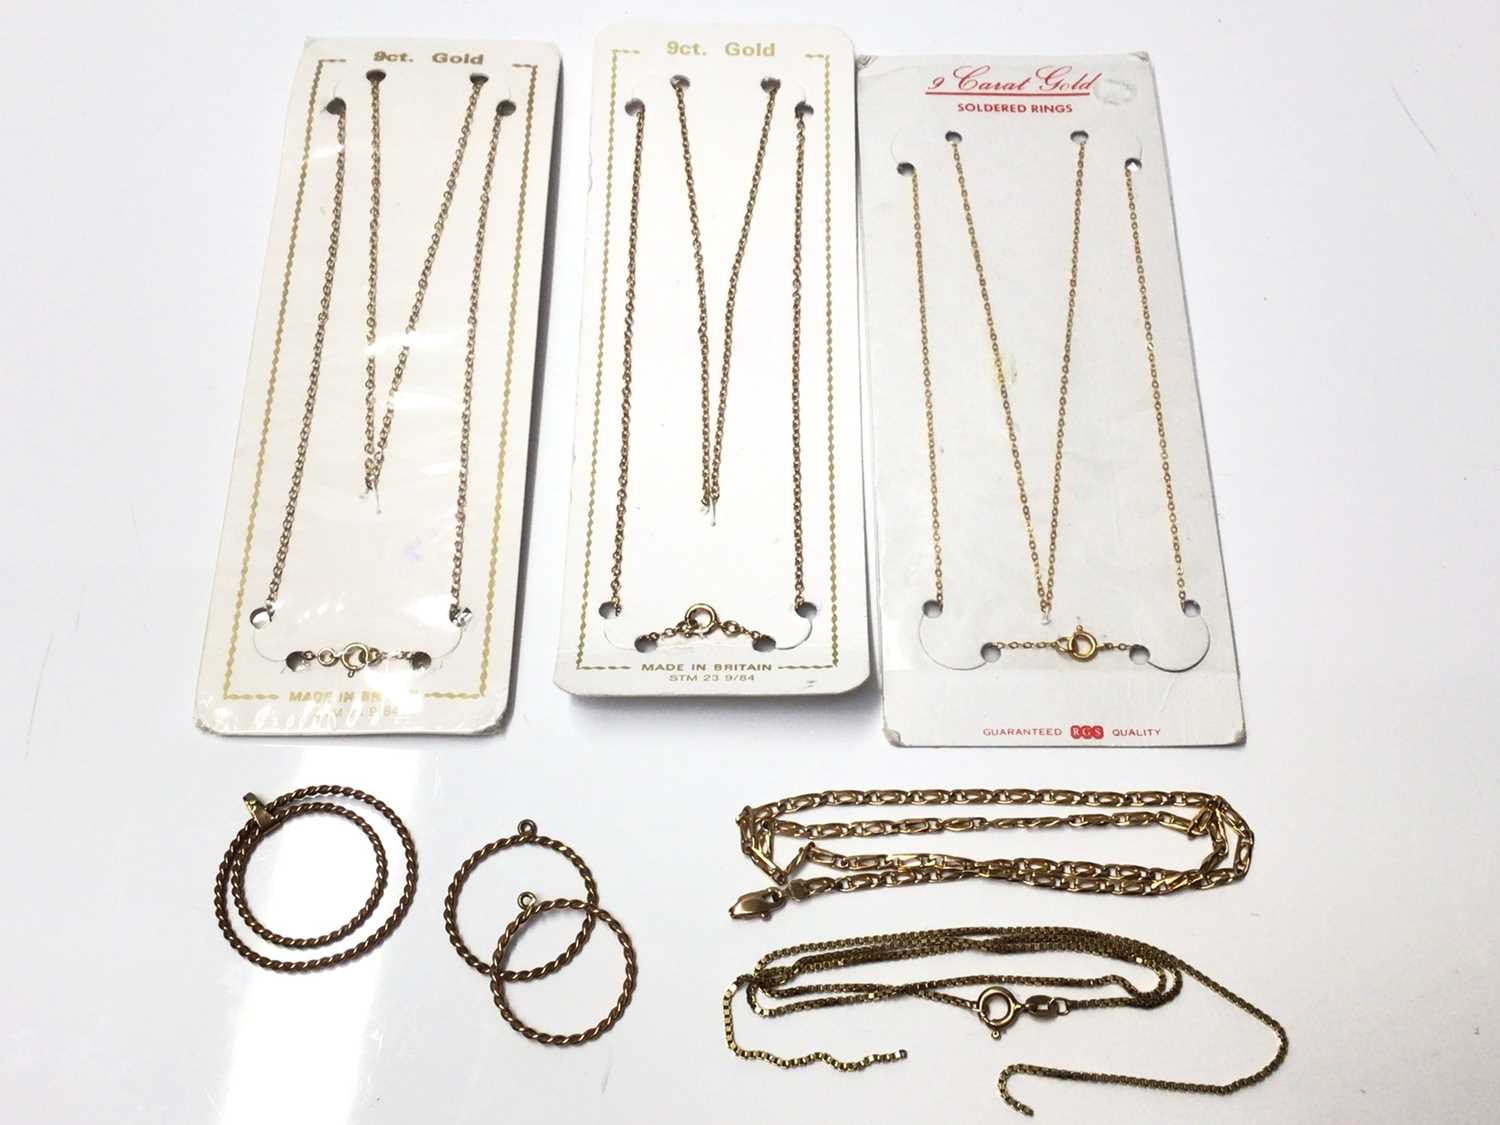 Lot 182 - Three 9ct gold chains in original packets, two other 9ct gold chains (broken)